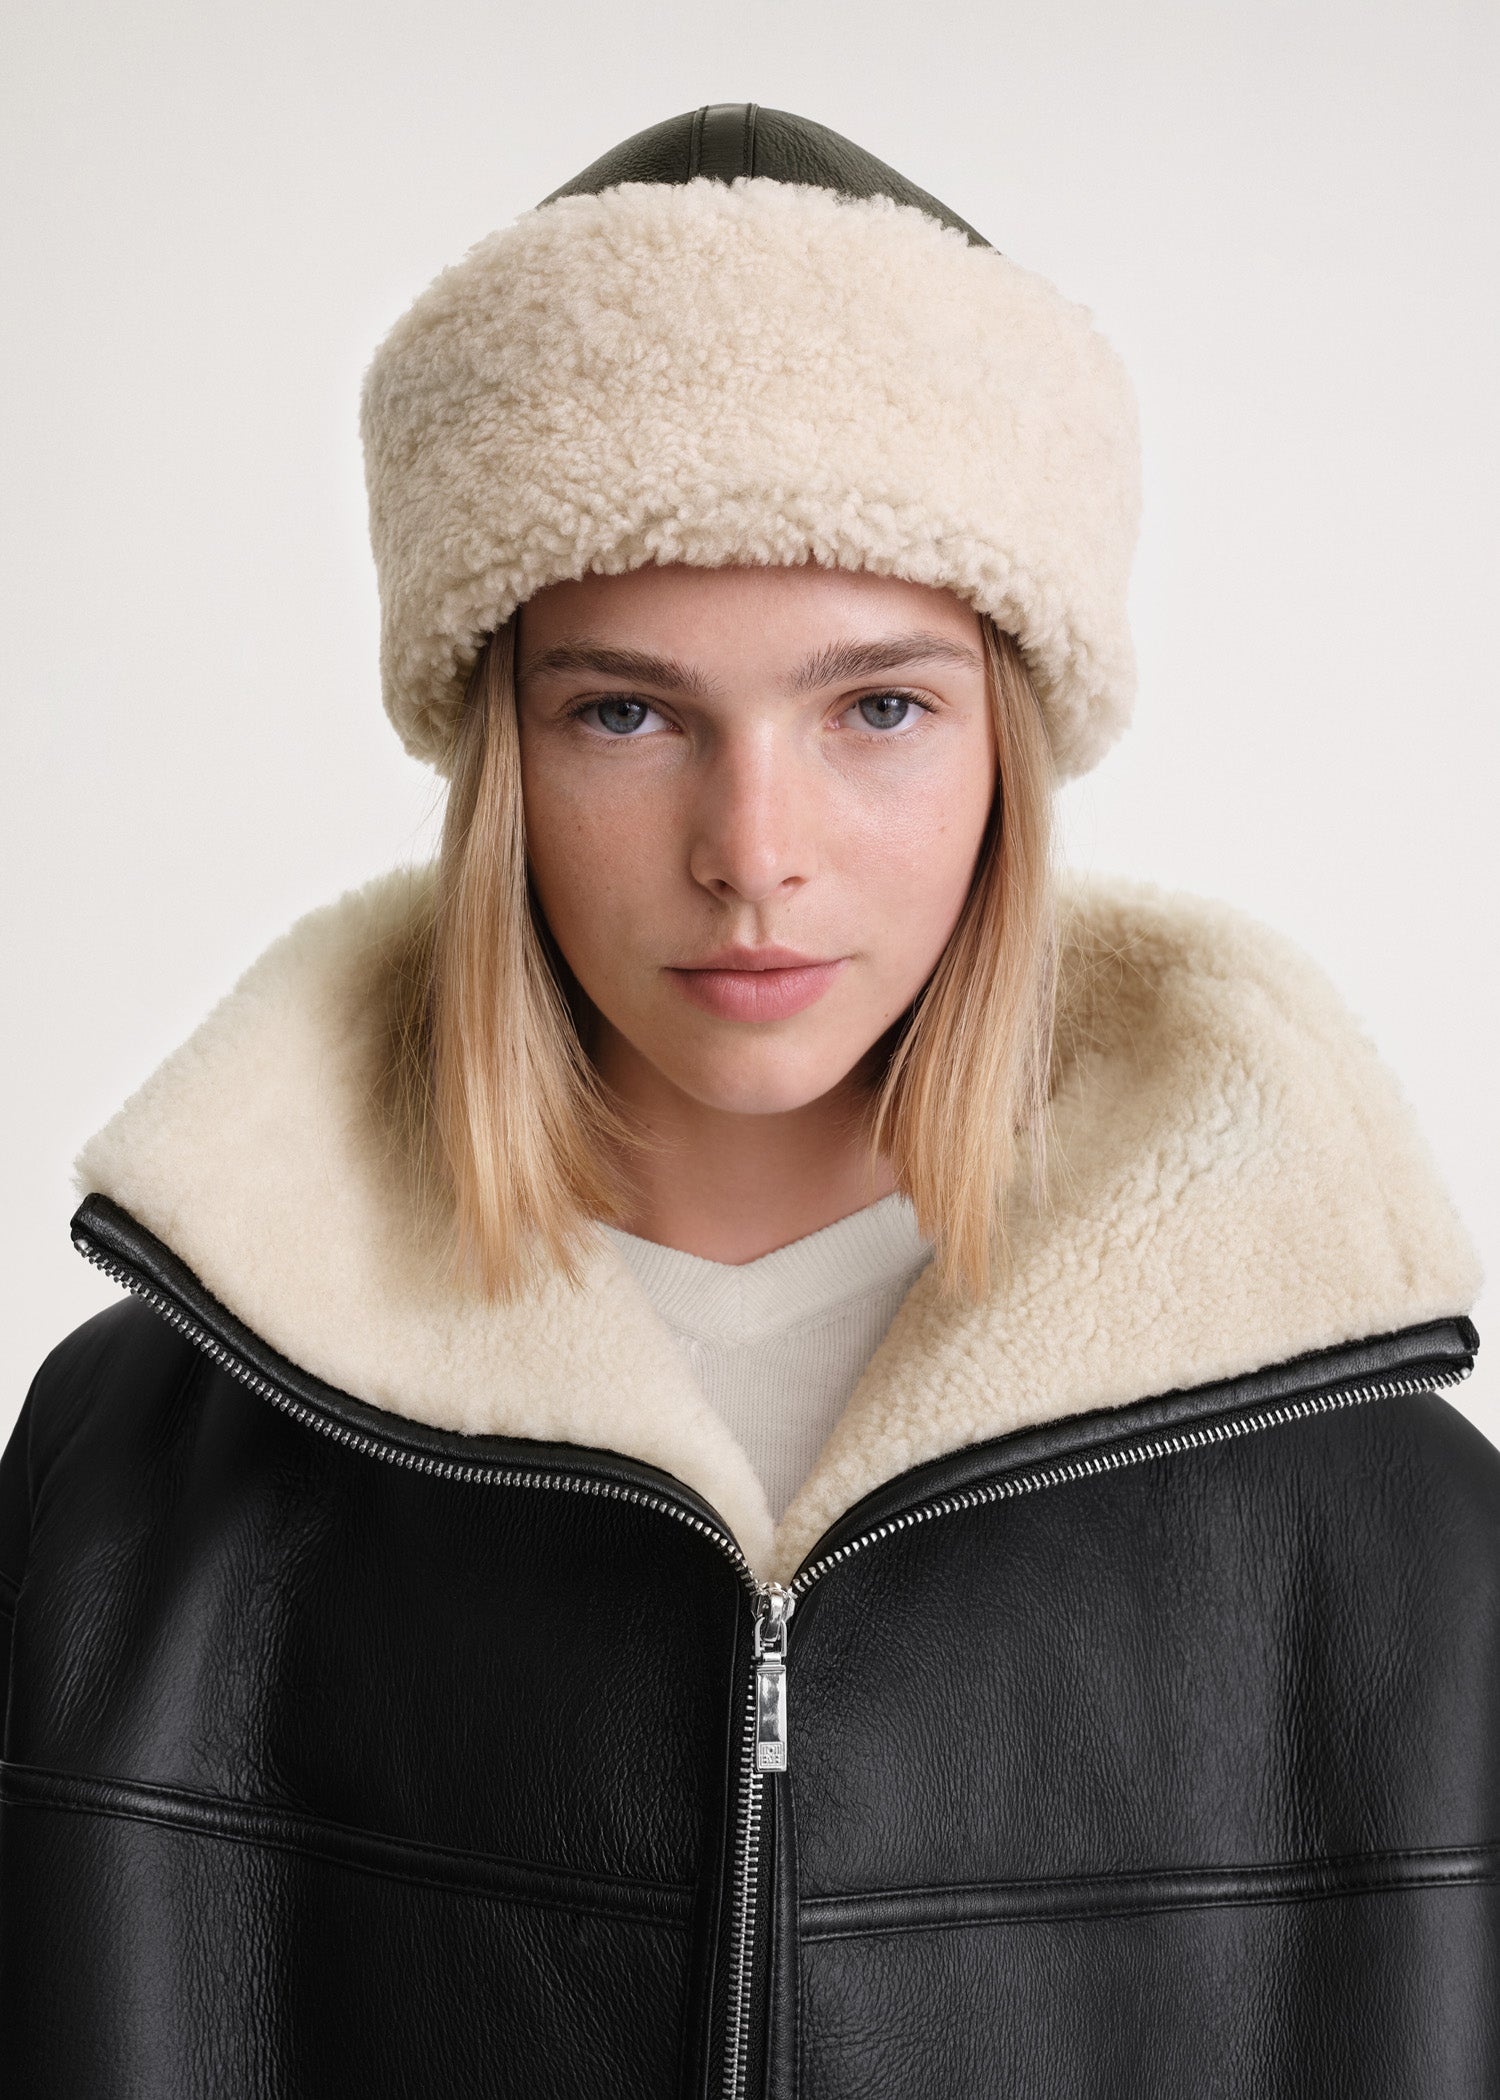 Shearling winter hat black/off white - 1